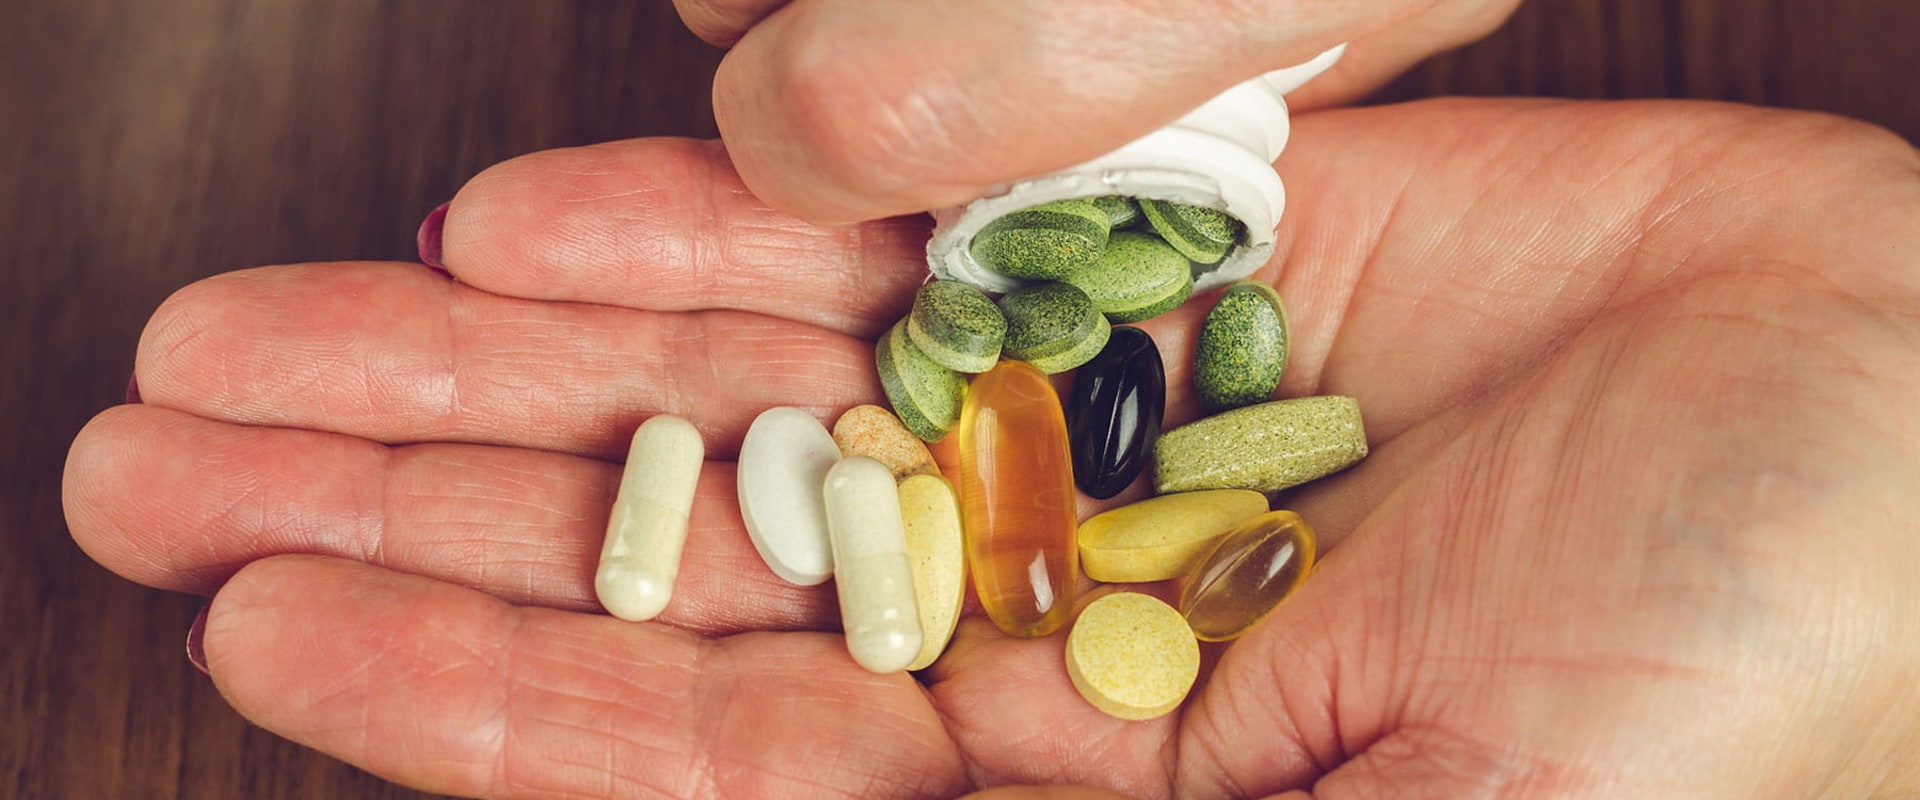 What Are the Risks of Taking All Your Supplements at Once?